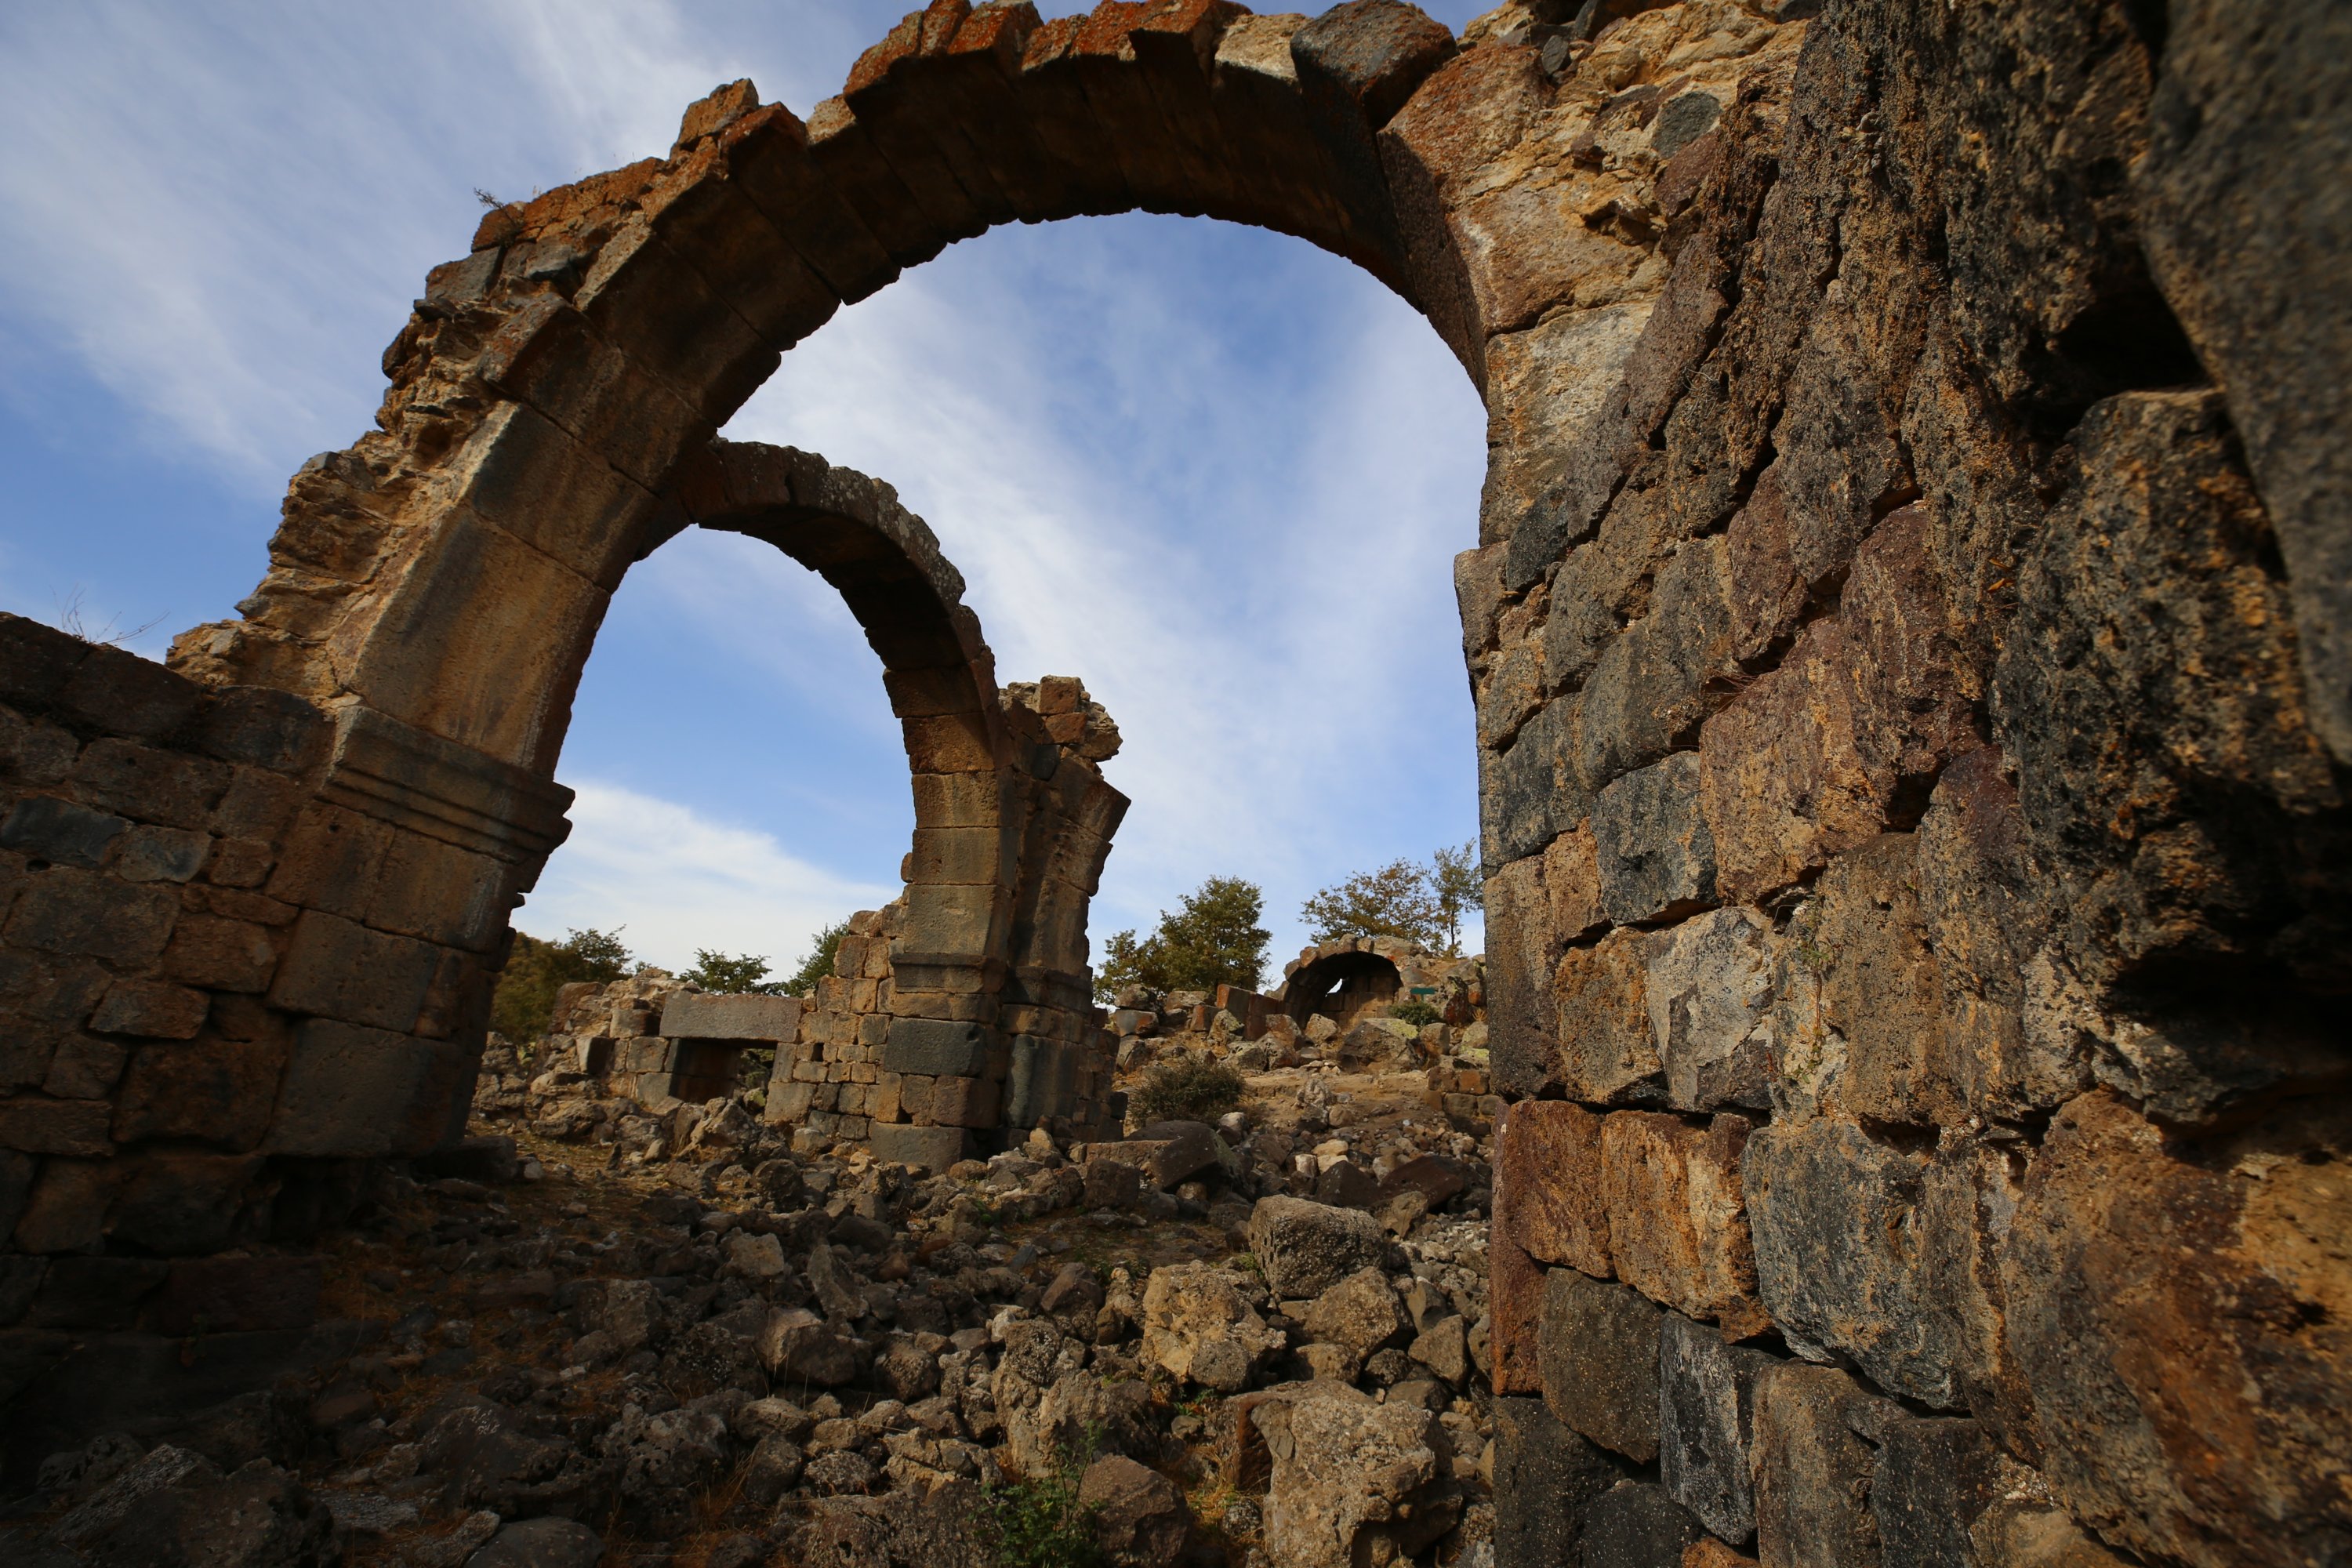 Gateway arches are seen in the ancient city of Nora, Aksaray, central Turkey, Oct. 21, 2020. (DHA PHOTO)